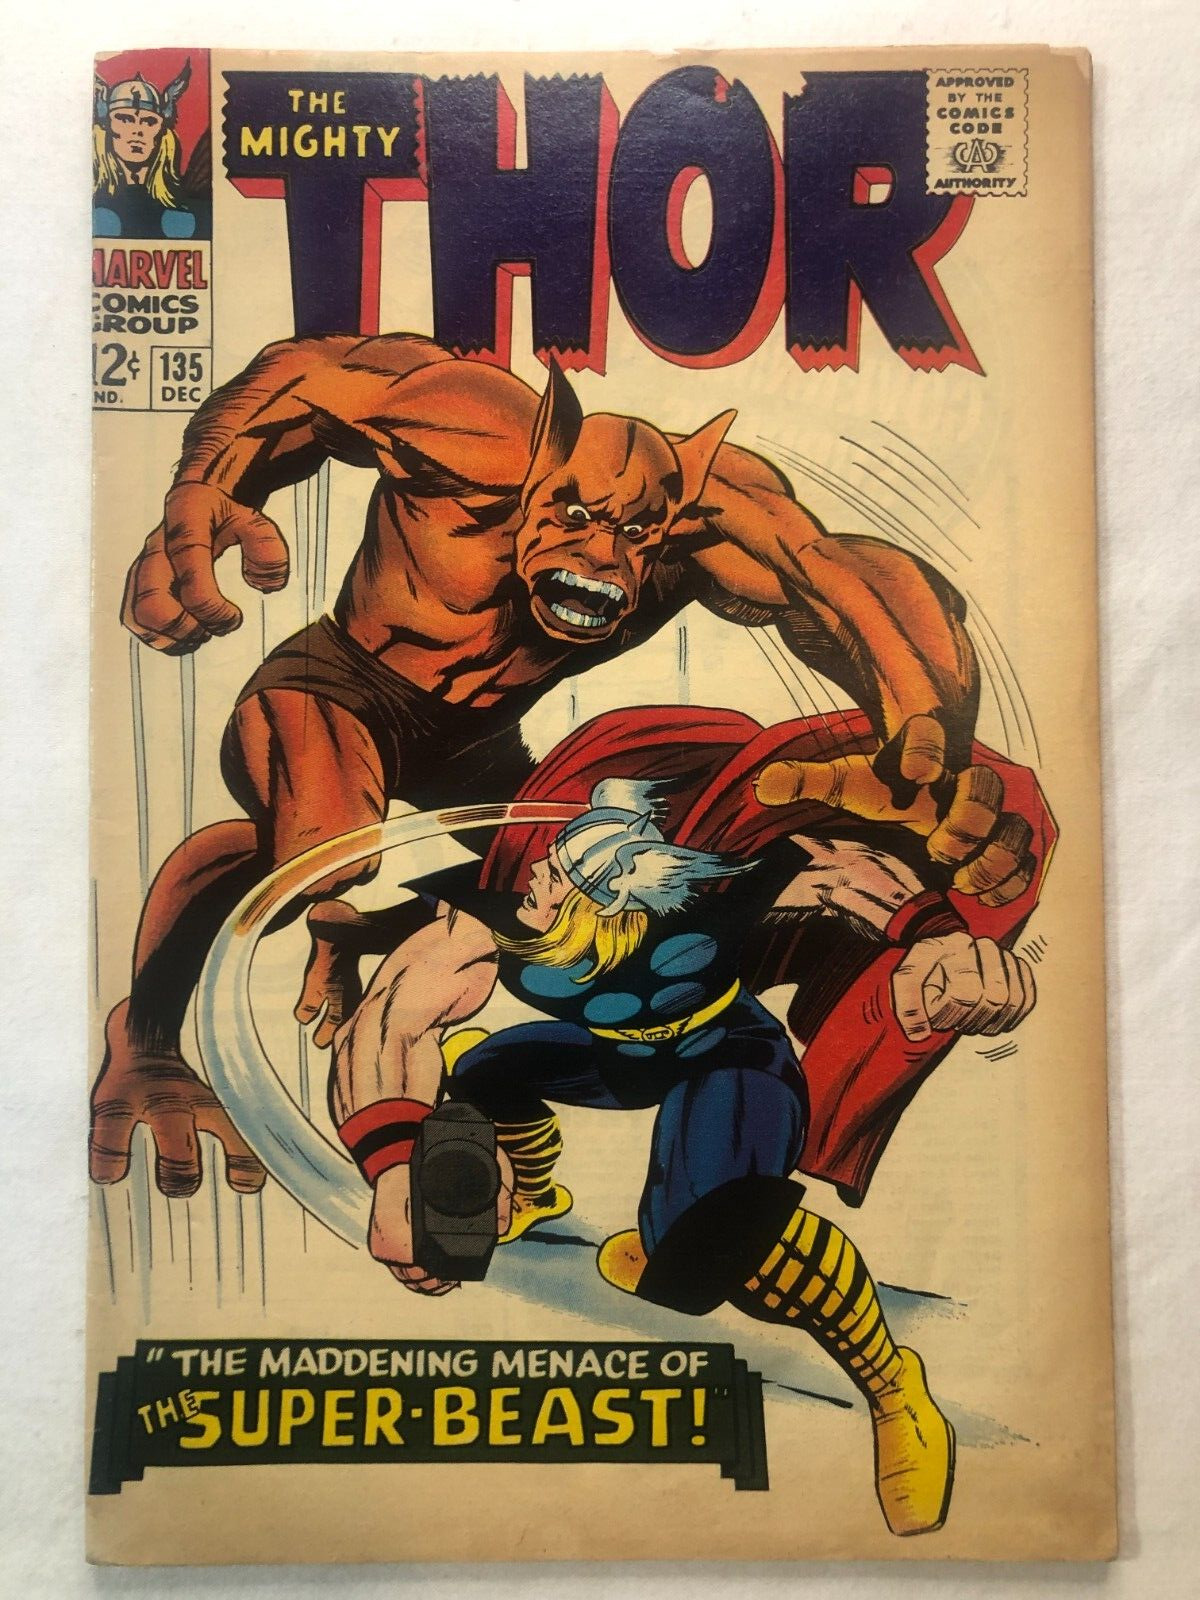 The Mighty Thor #135 December 1966 Vintage Silver Age Marvel Comics Nice Copy